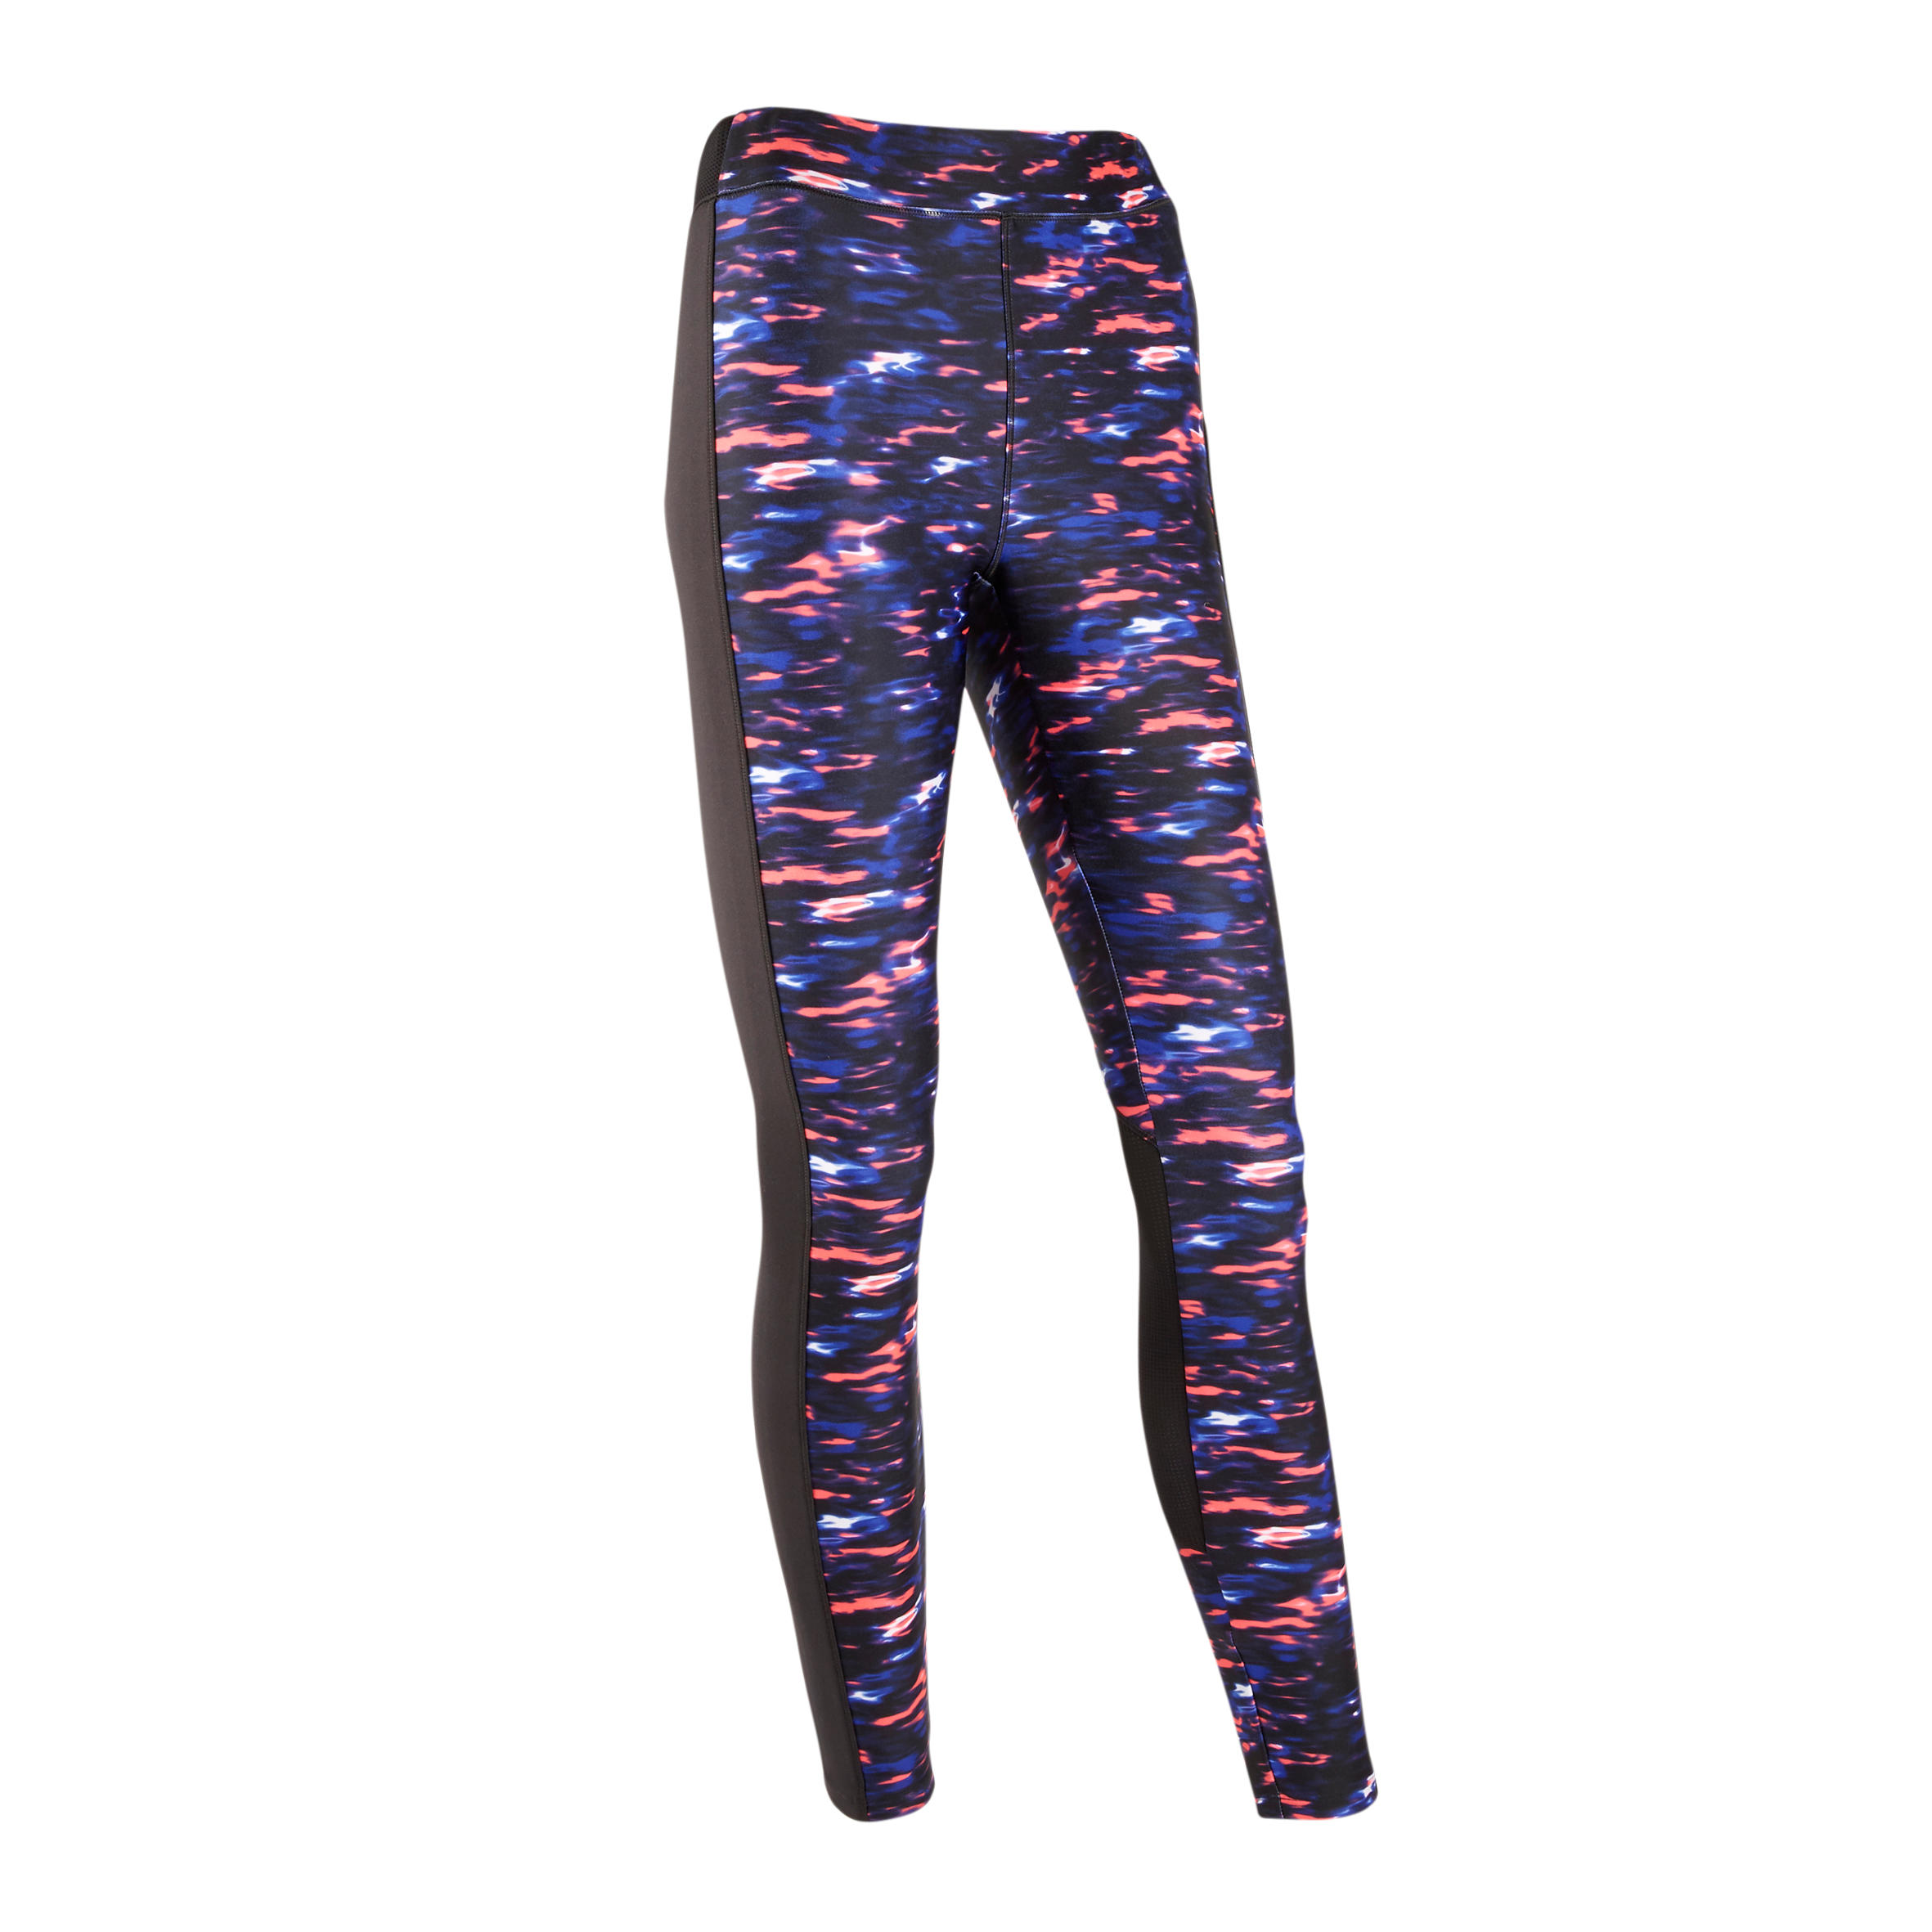 Raypose Women's Printed Legging with Pocket, size Large (NWT)